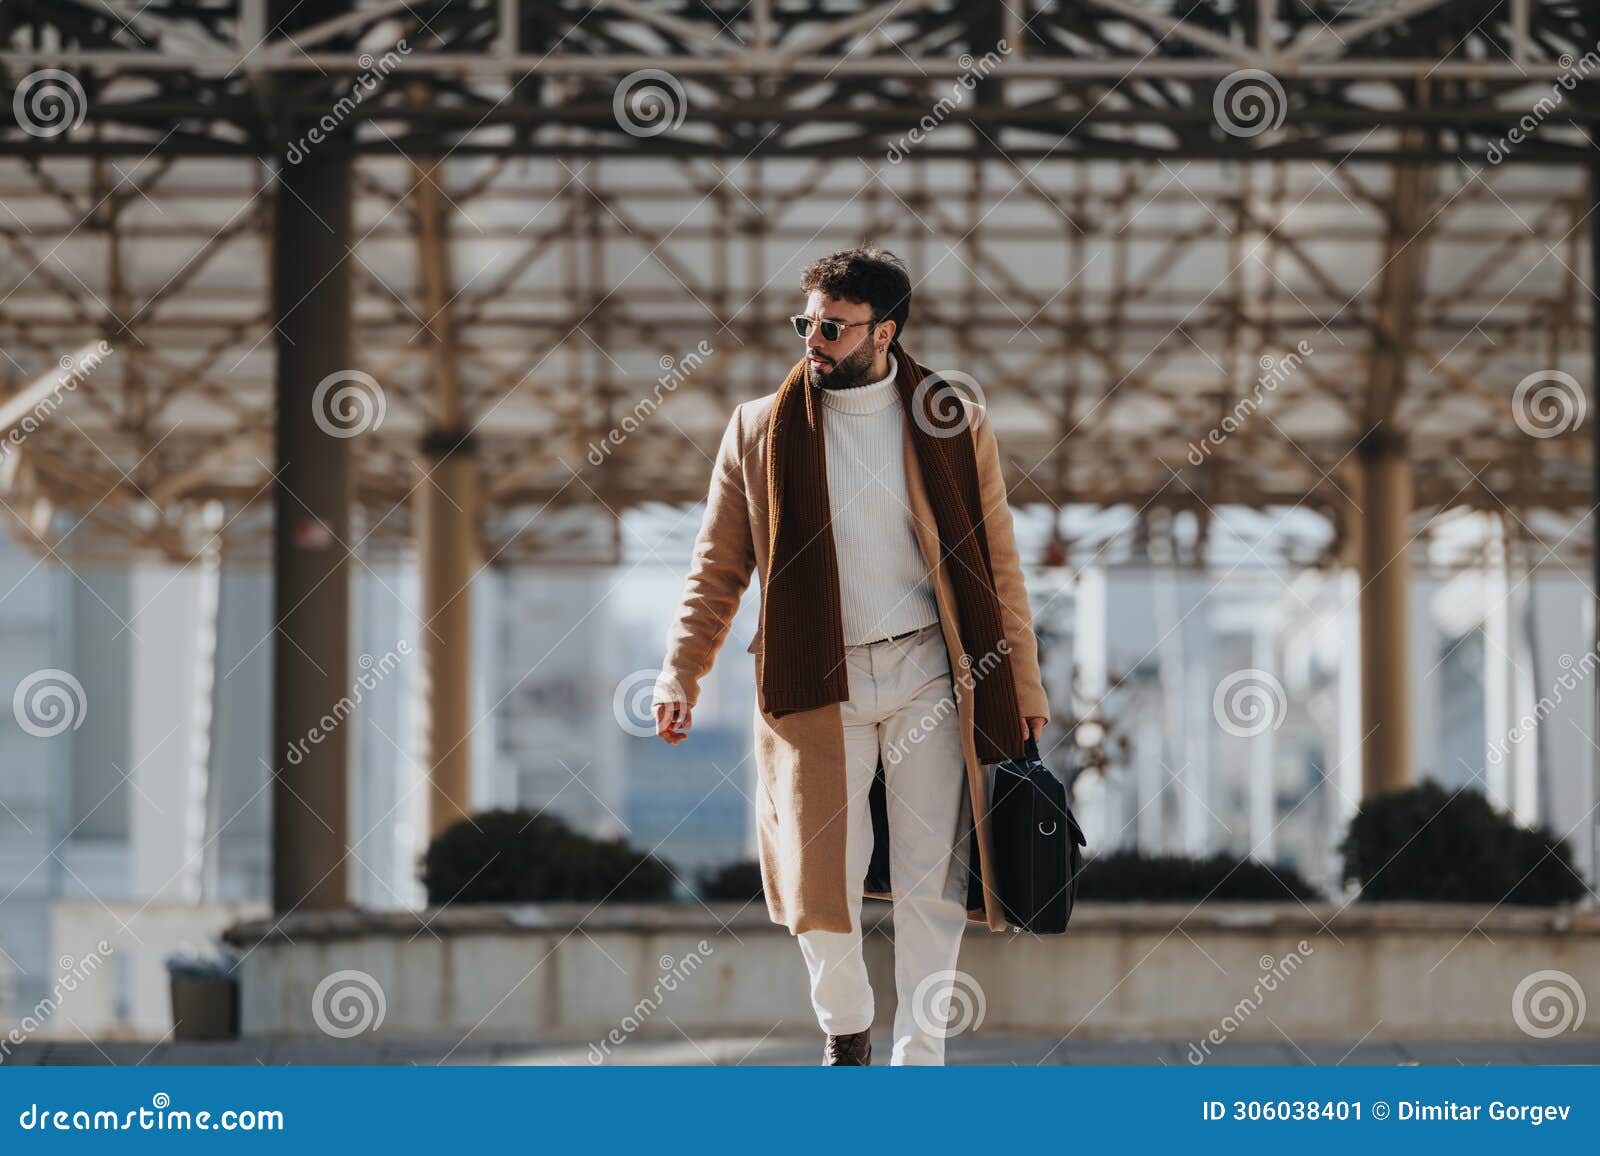 stylish young man walking with confidence in urban setting.